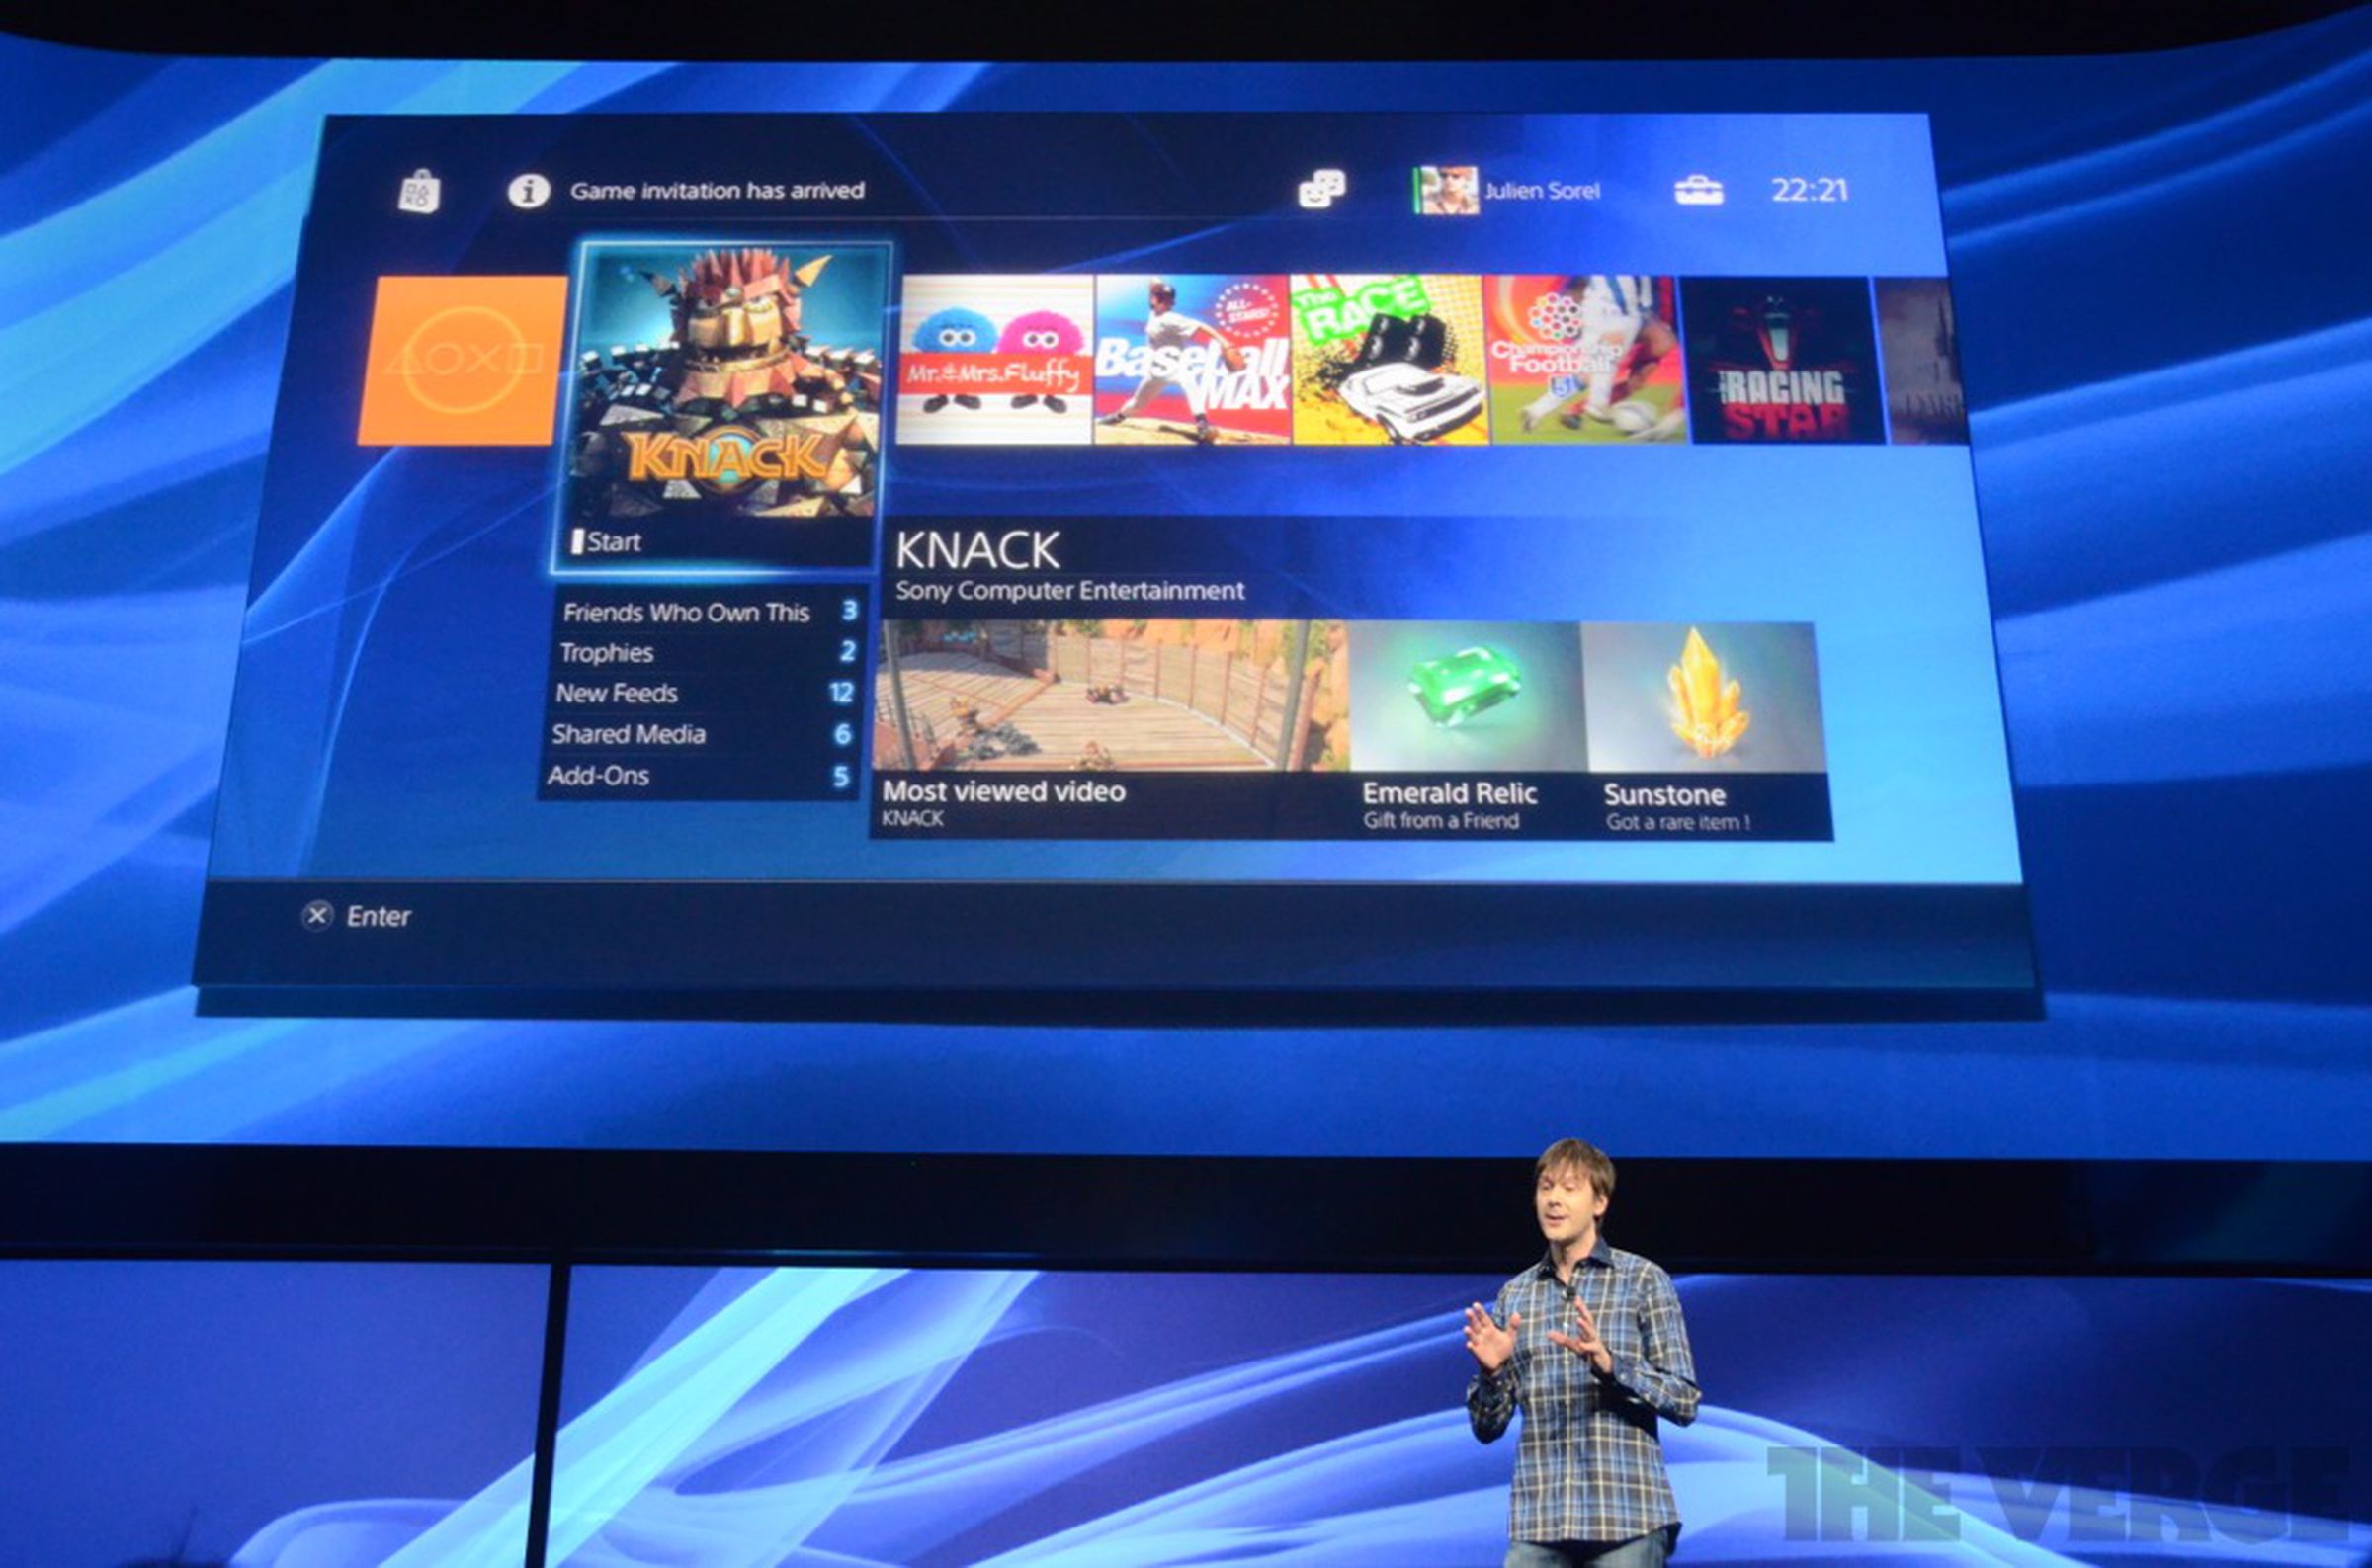 Sony PlayStation 4 user interface pictures